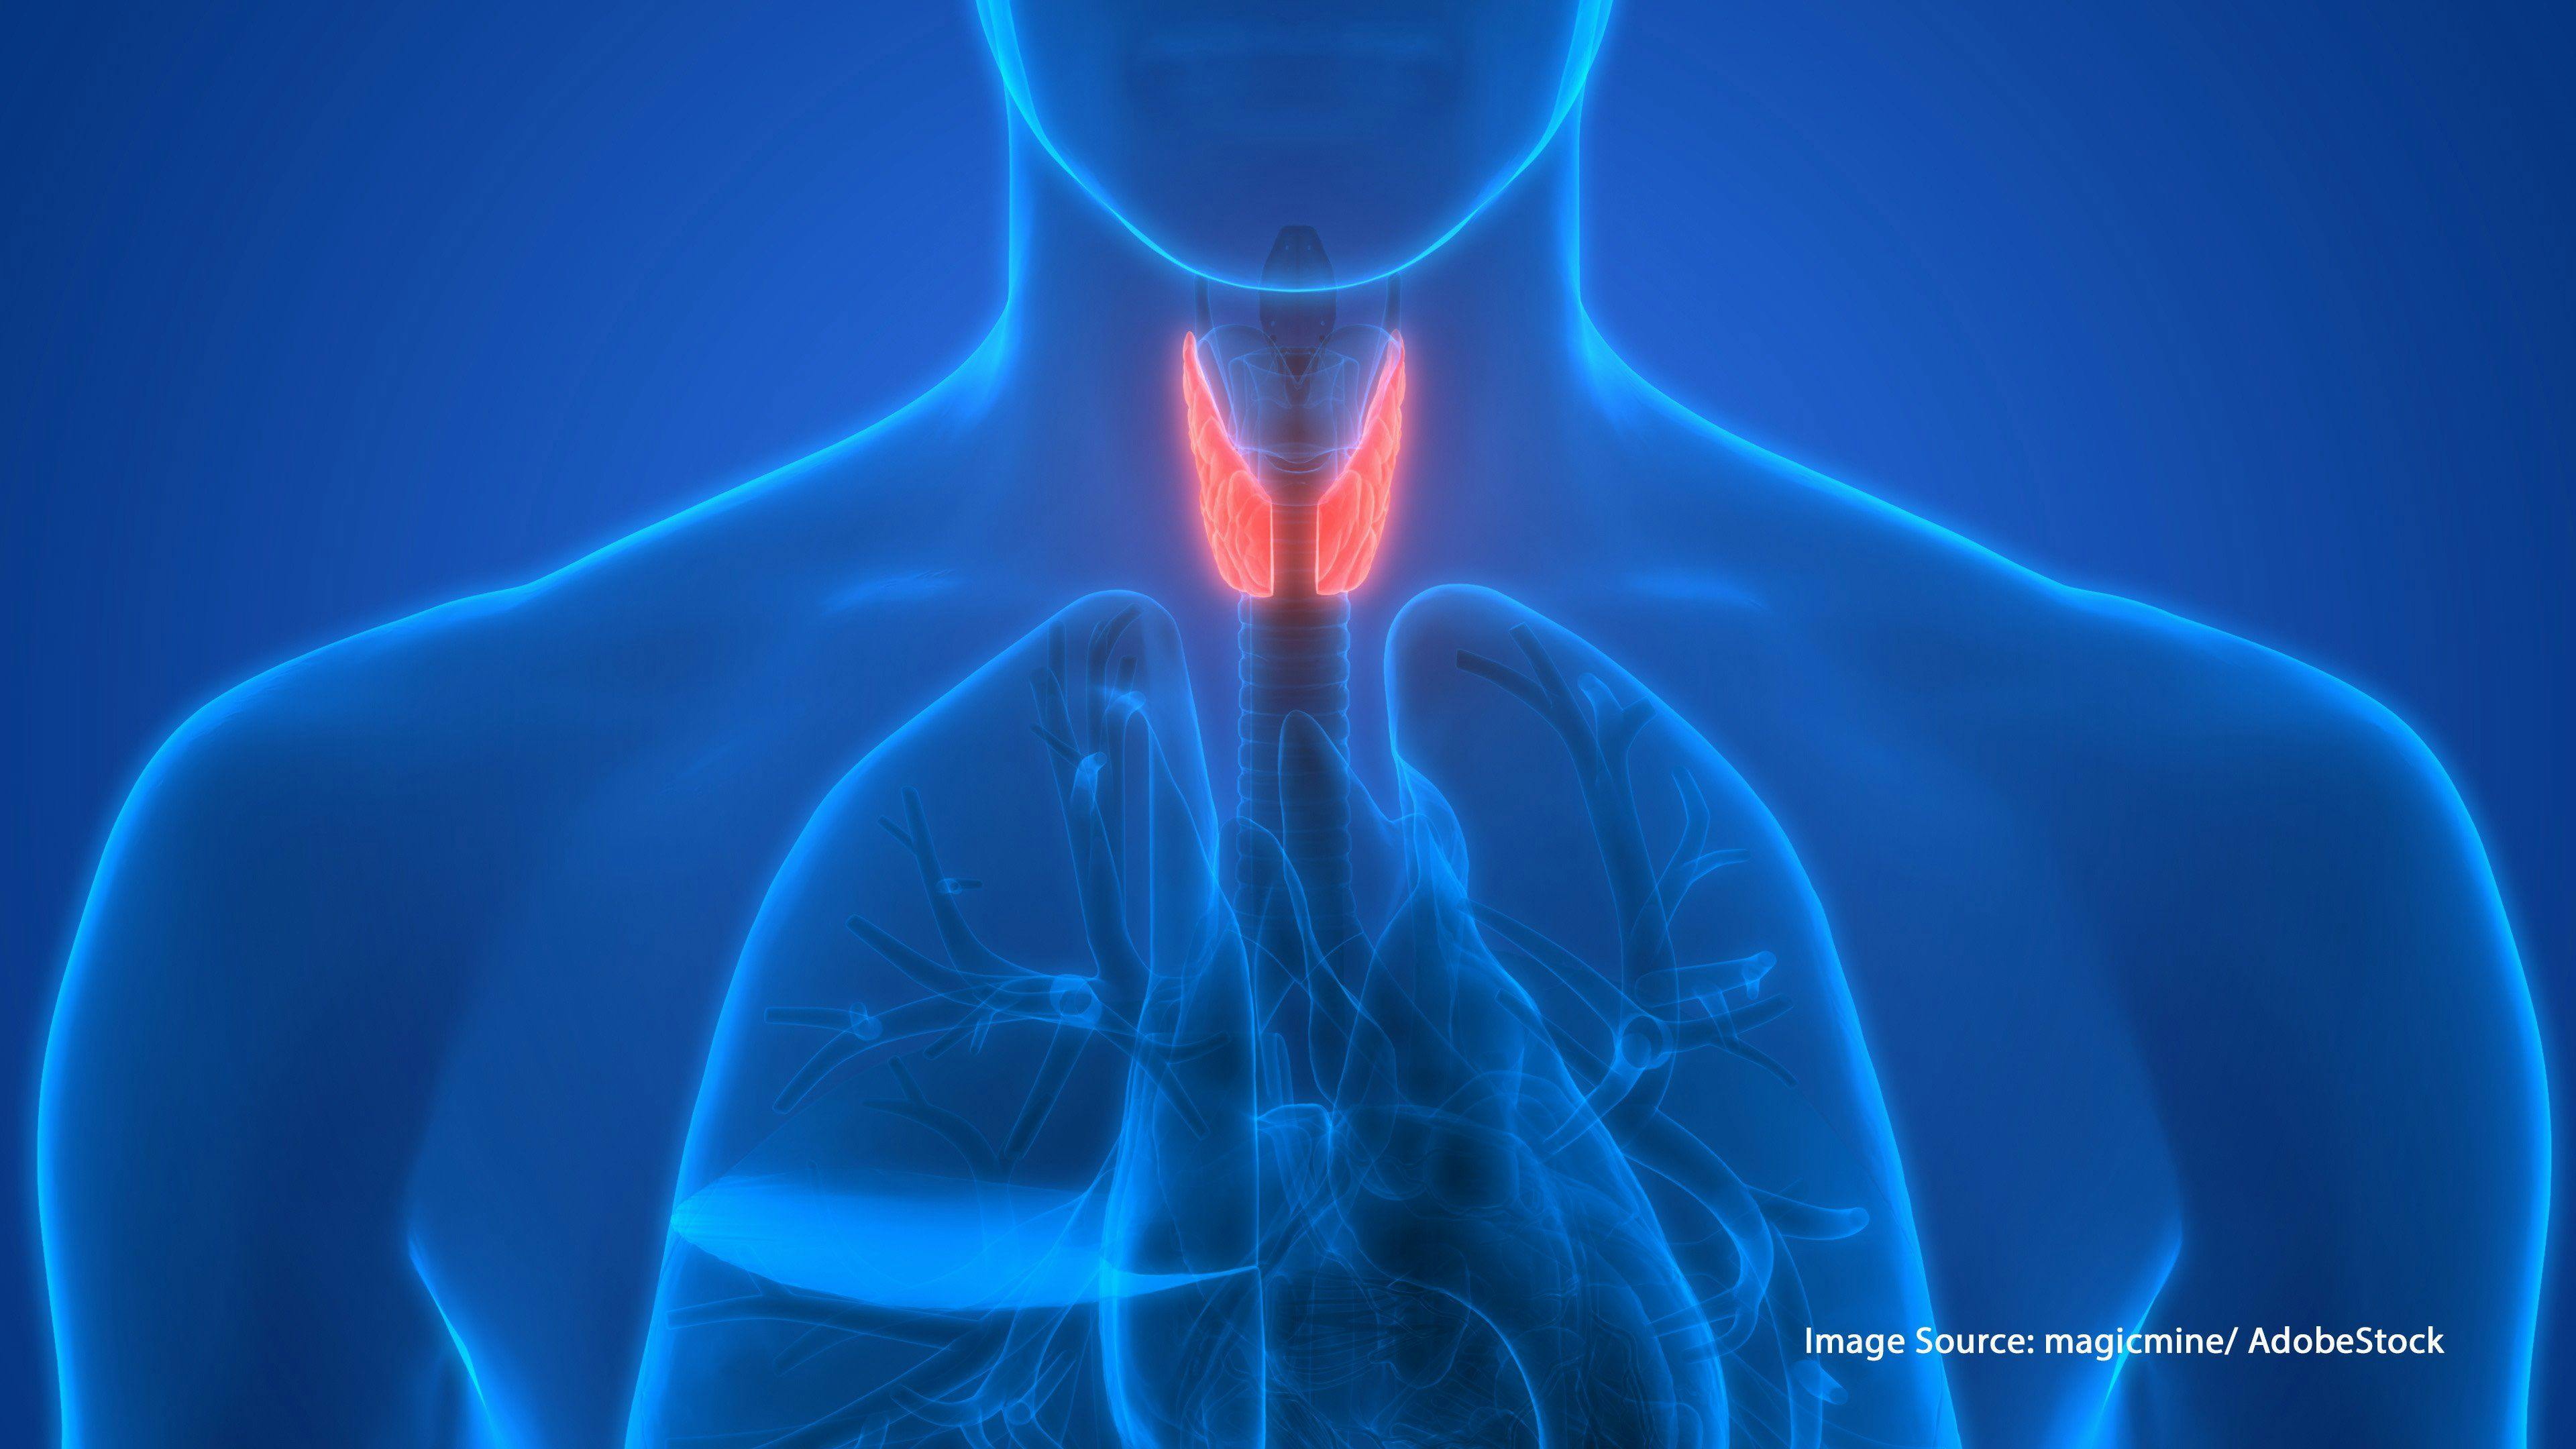 Risk Factors for Recurrence in Papillary Thyroid Cancer Identified